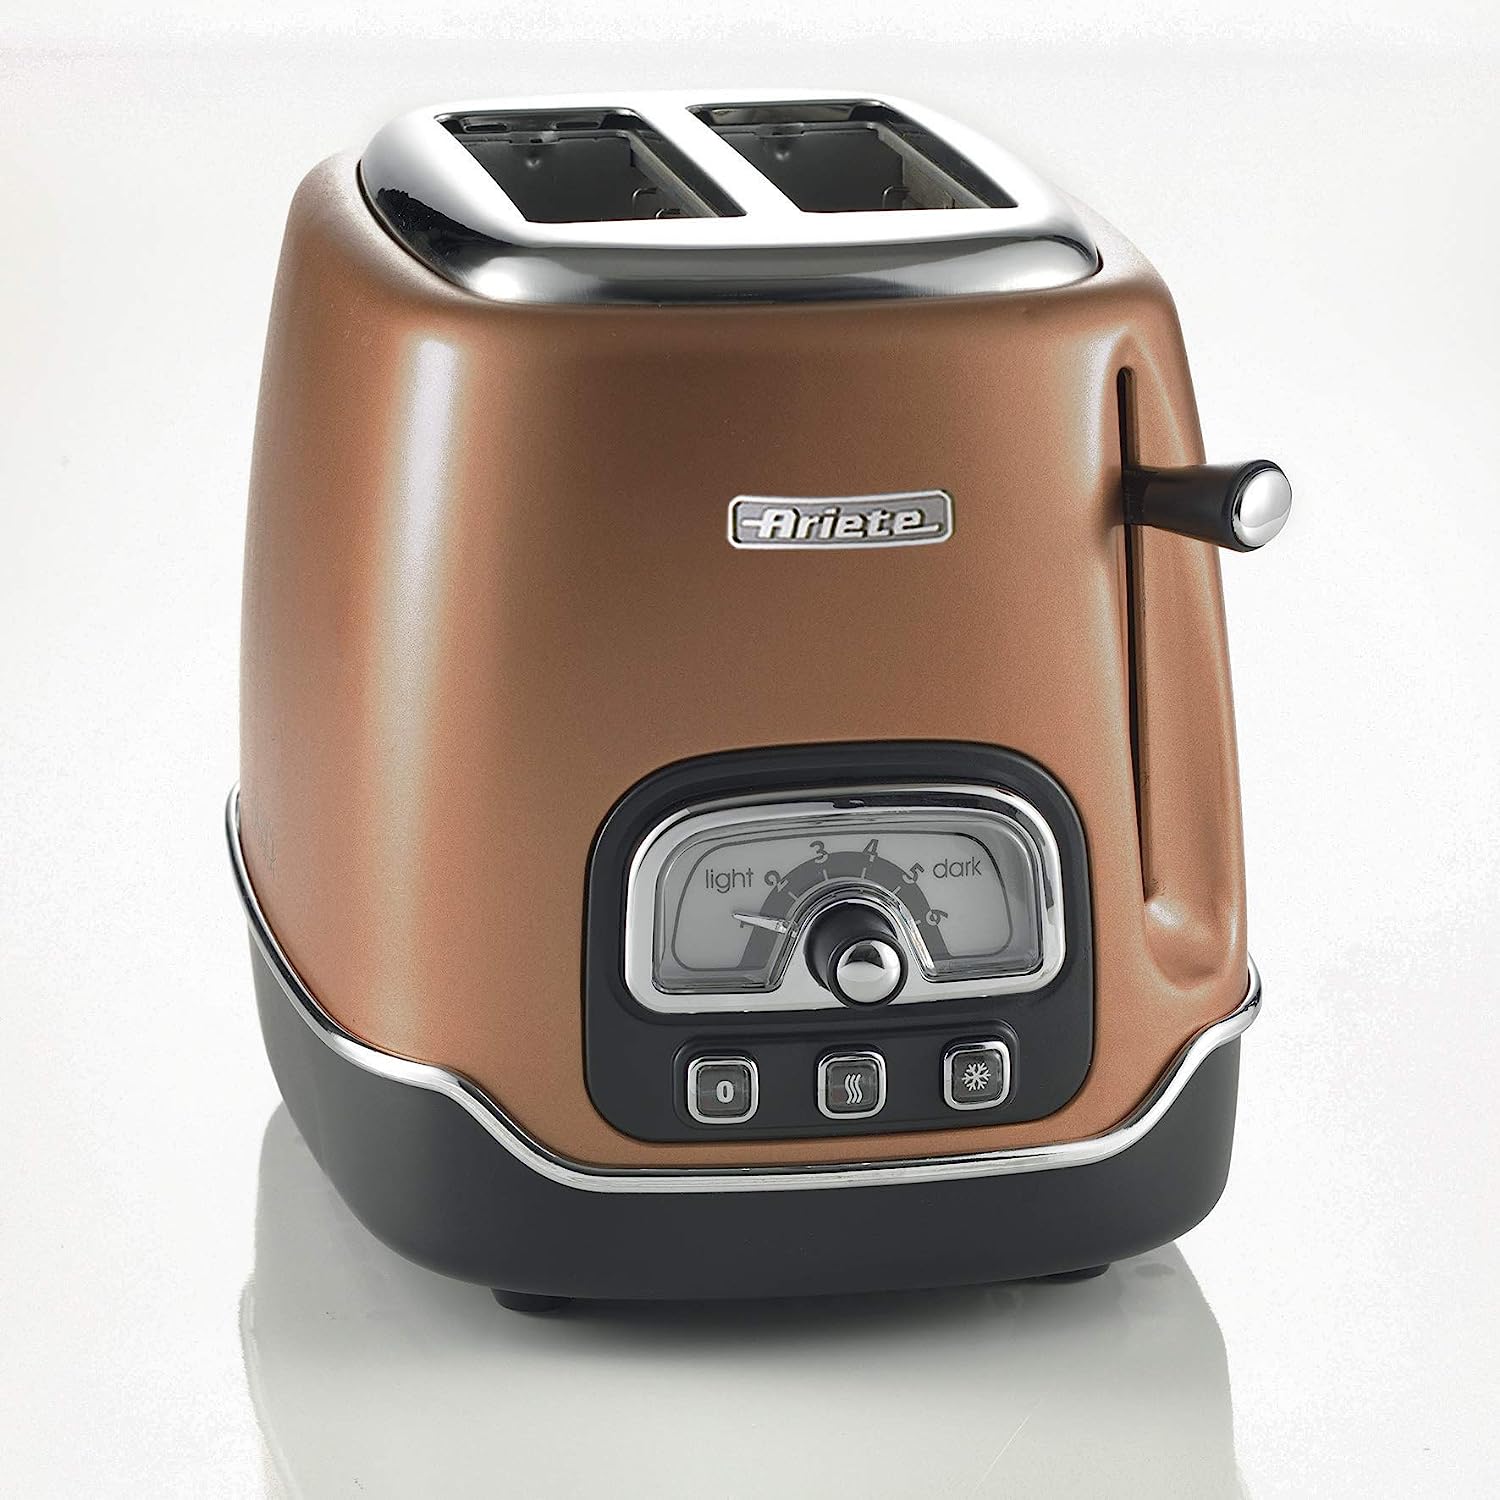 Ariete Tostapane Classica 158/38, Electric Toaster 2 Slices, Without Tongs,  815 W, 3 Functions, 6 Browning Levels, Copper